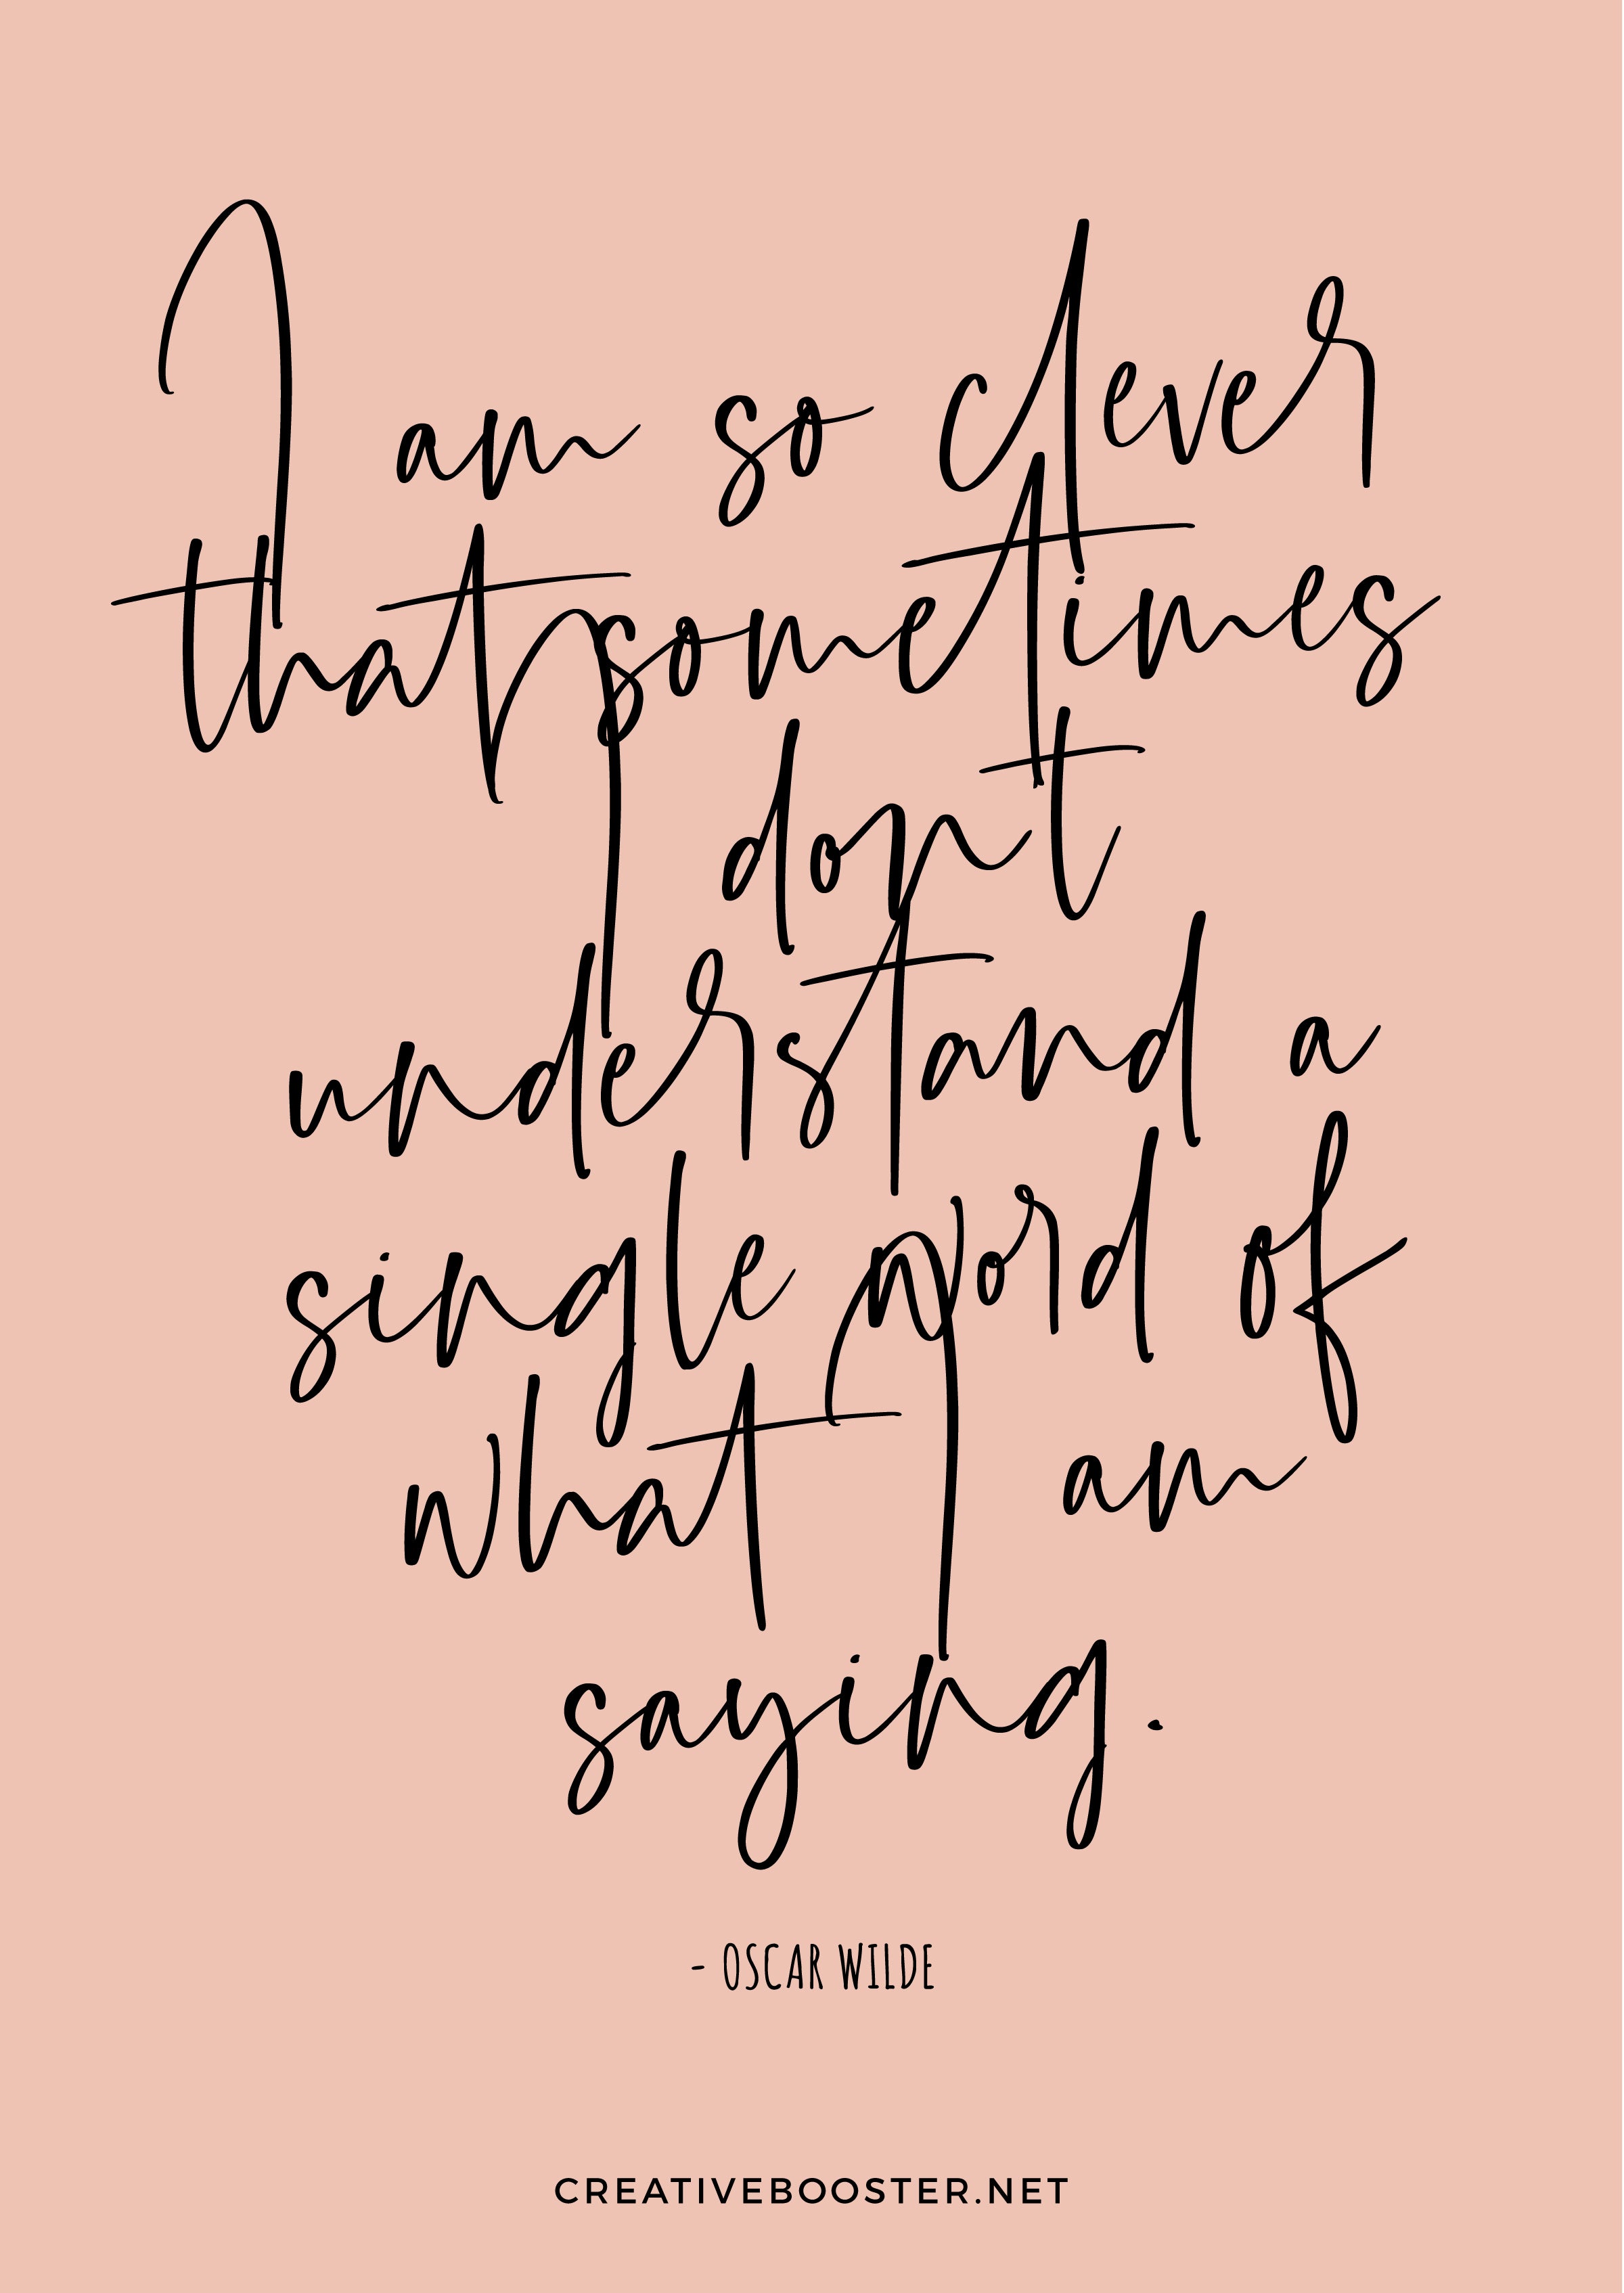 Funny-You-Got-This-Quotes-"I am so clever that sometimes I don't understand a single word of what I am saying." - Oscar Wilde (Quote Art Print)